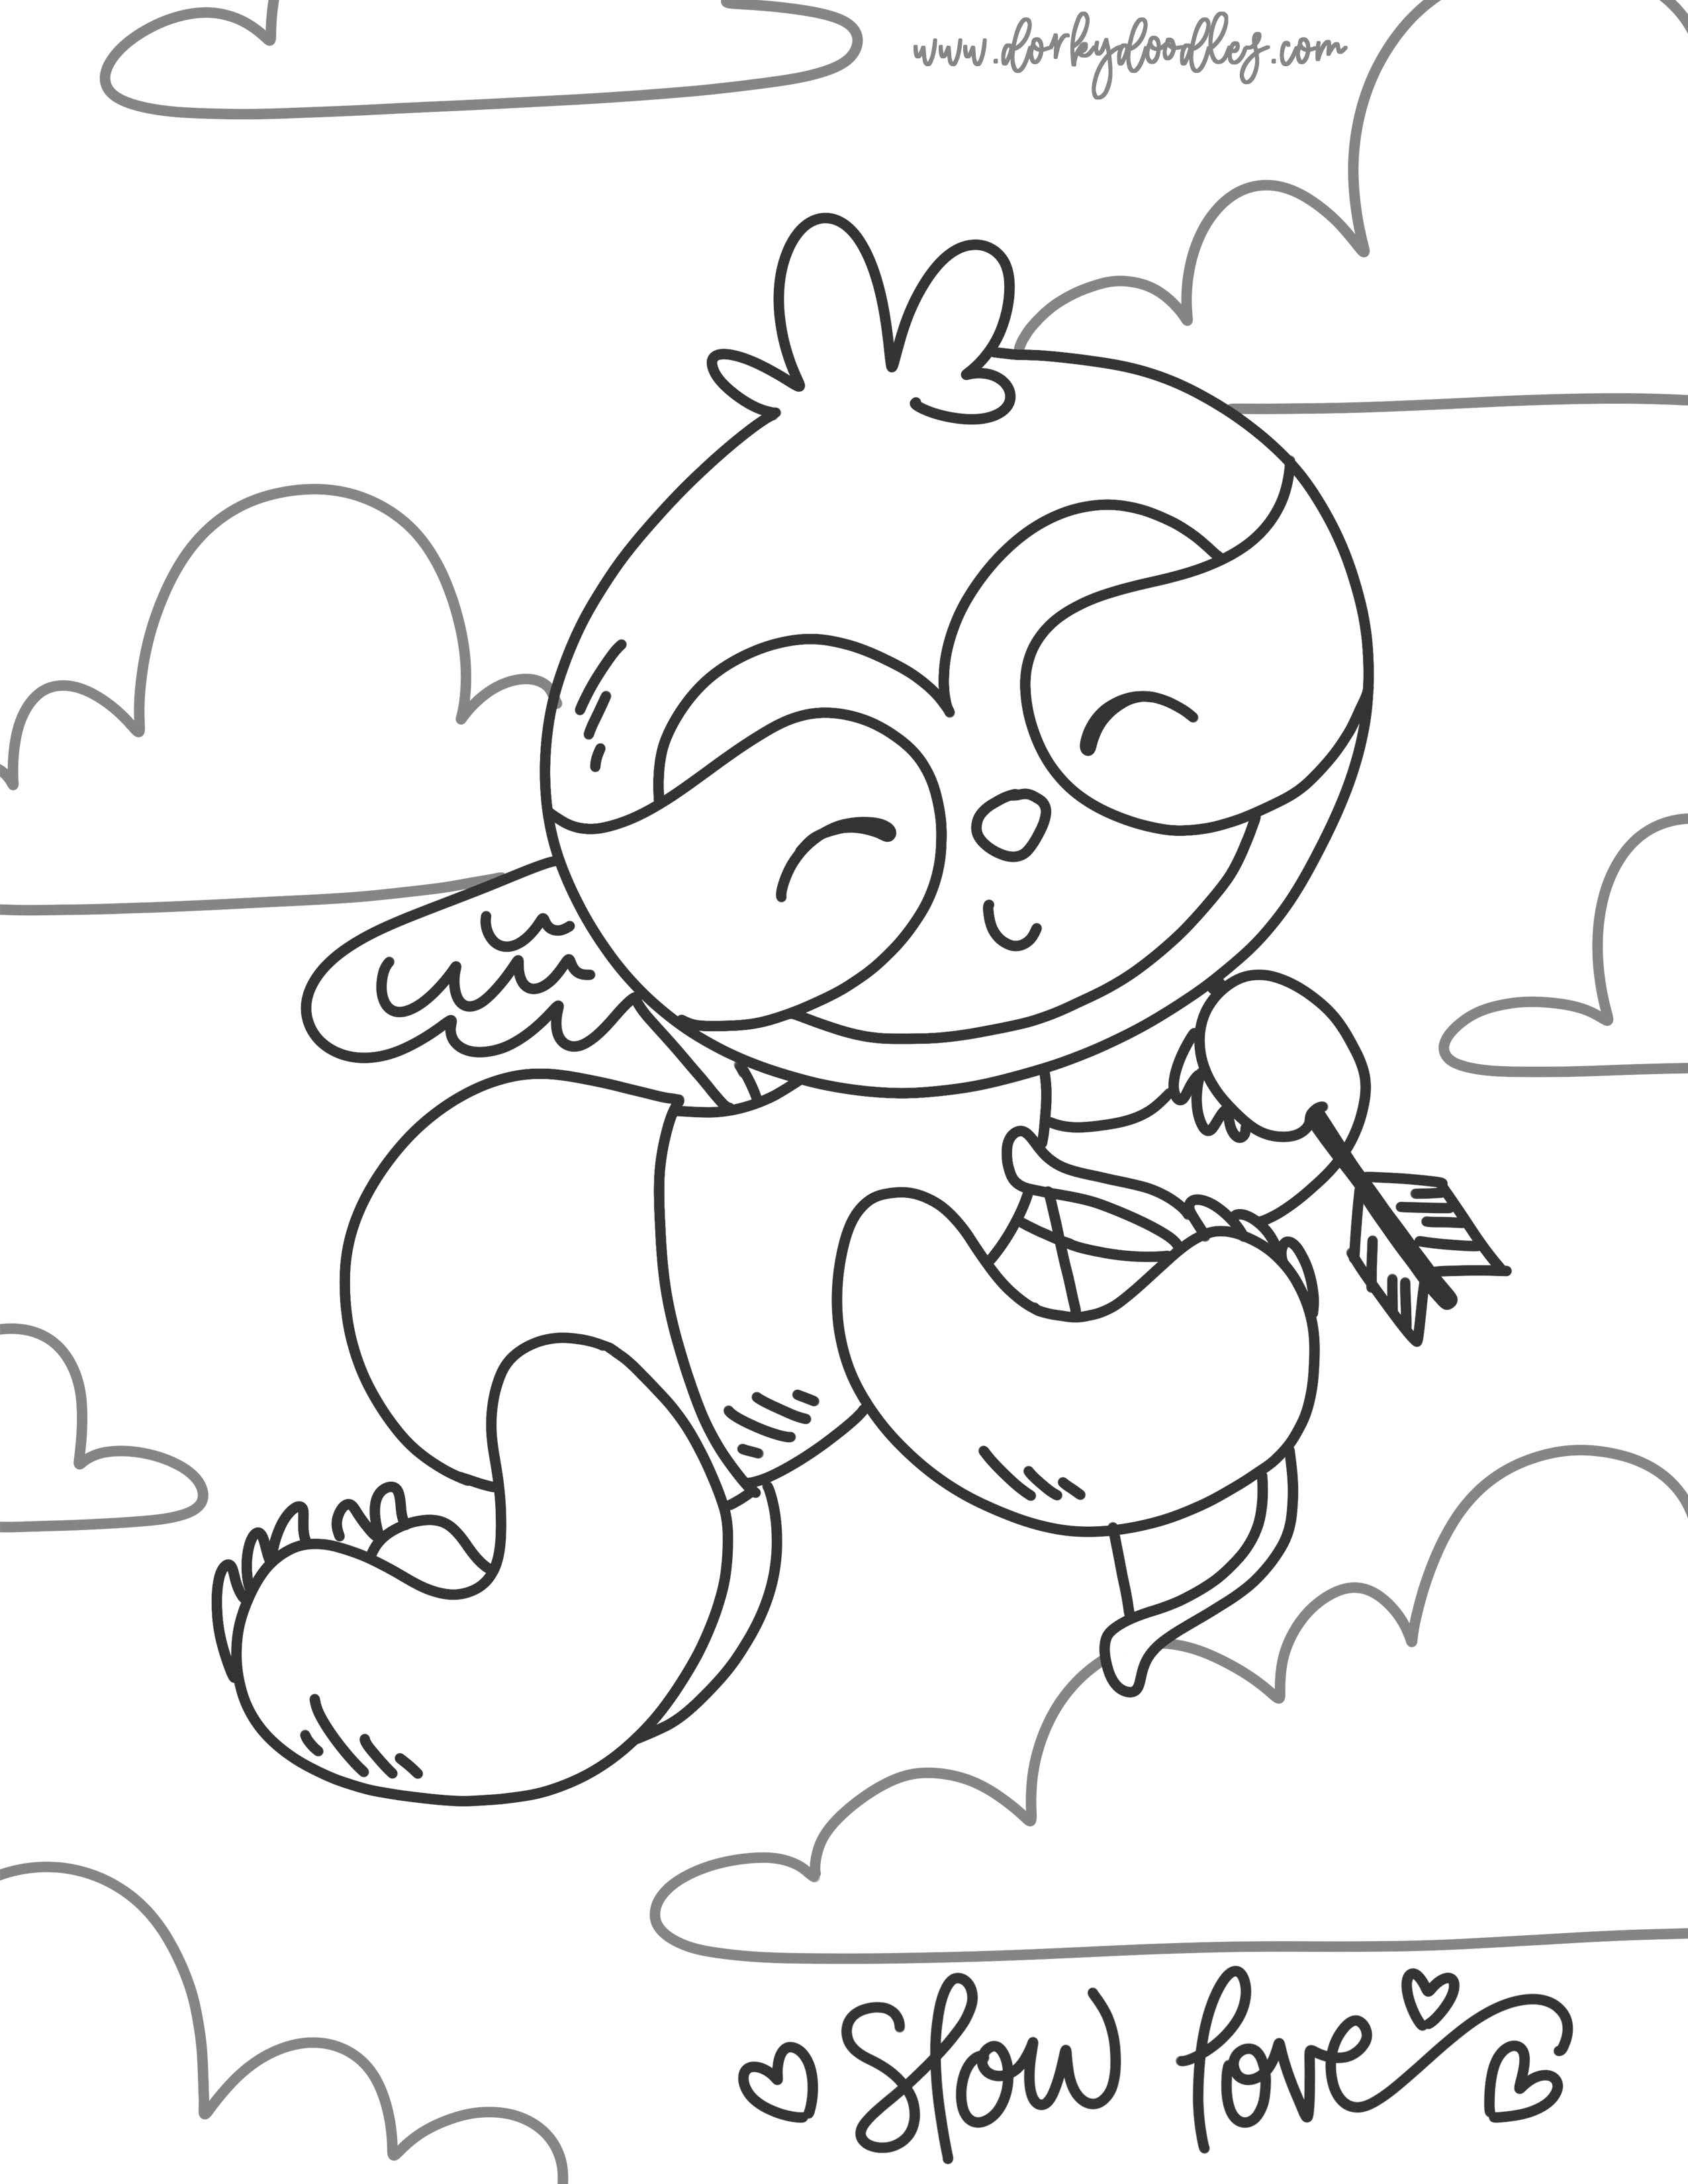 cute sloth cupid valentine coloring page